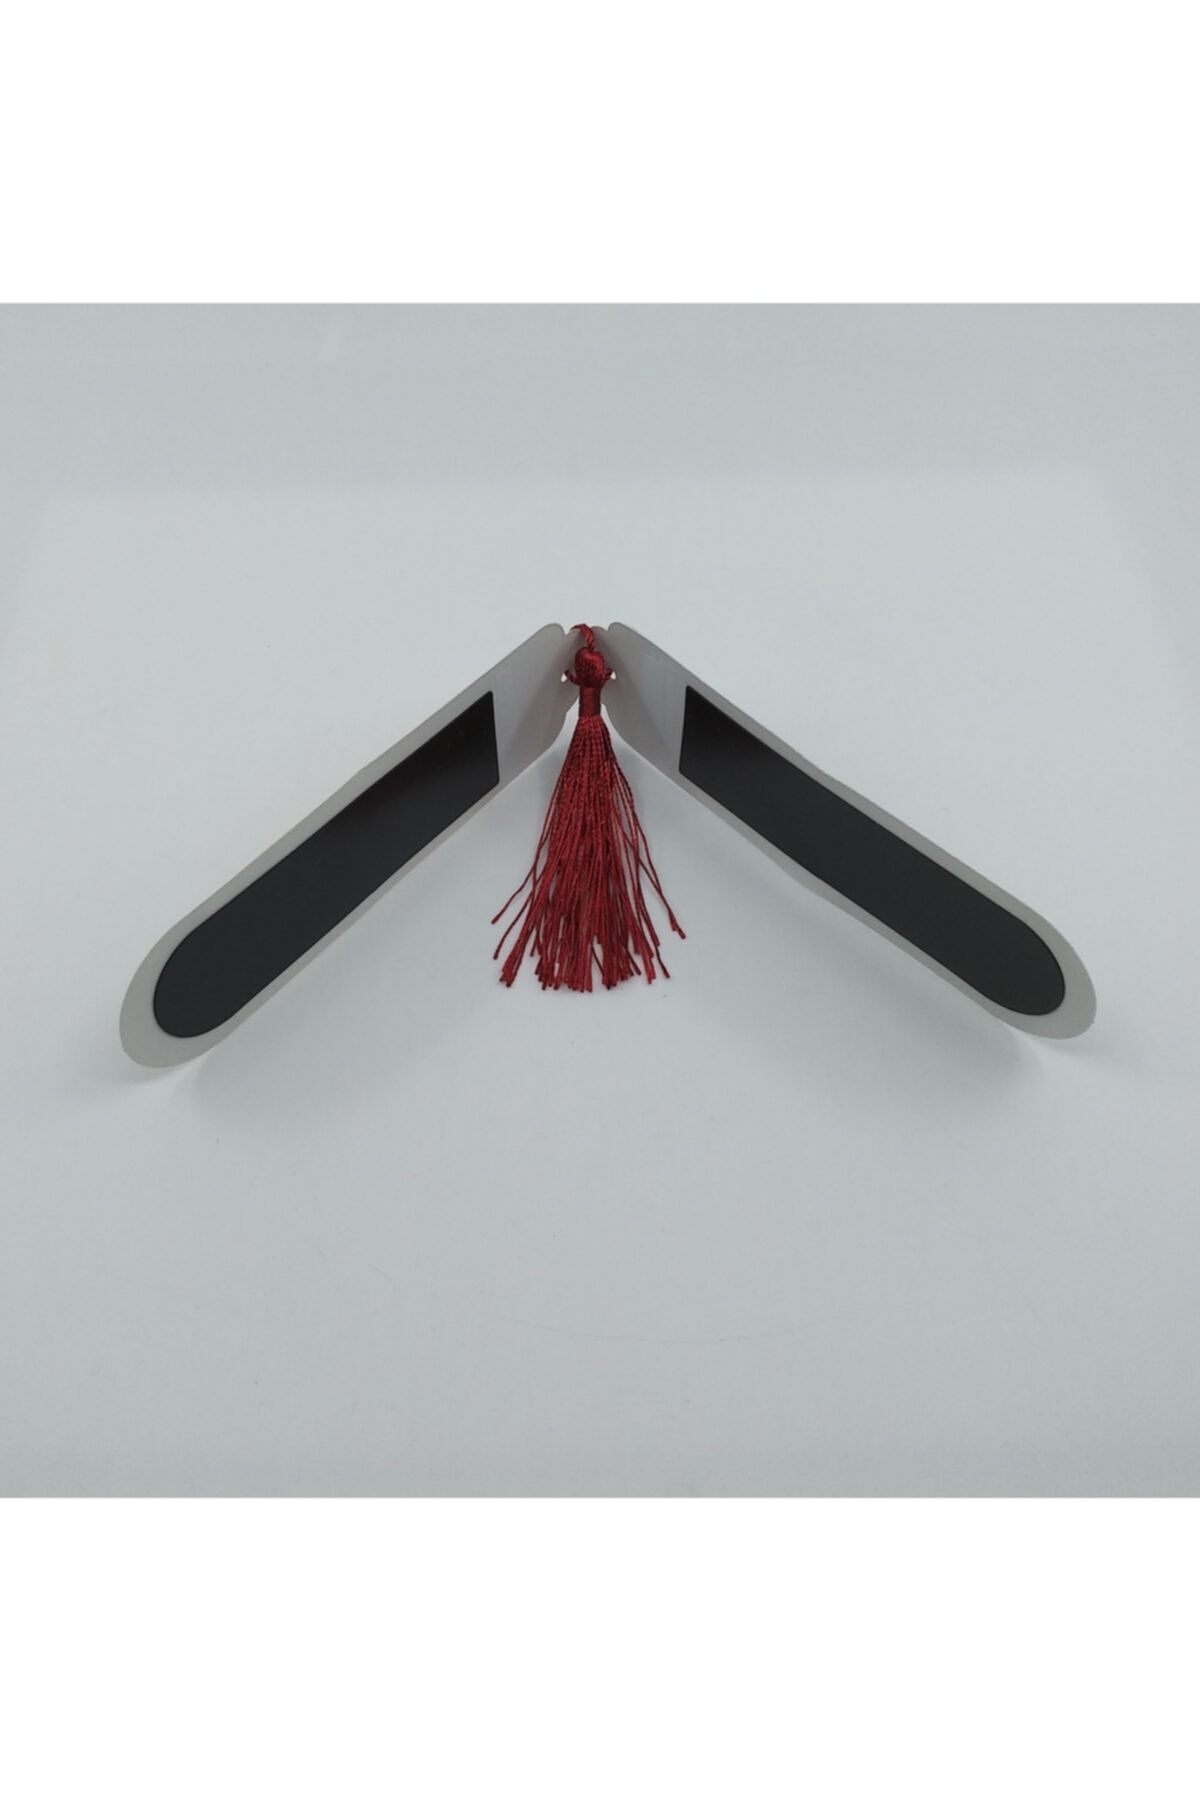 Giftsturkiye Bookmarks with Tassels and Magnets on the Back Gift 7 Pieces -  Trendyol